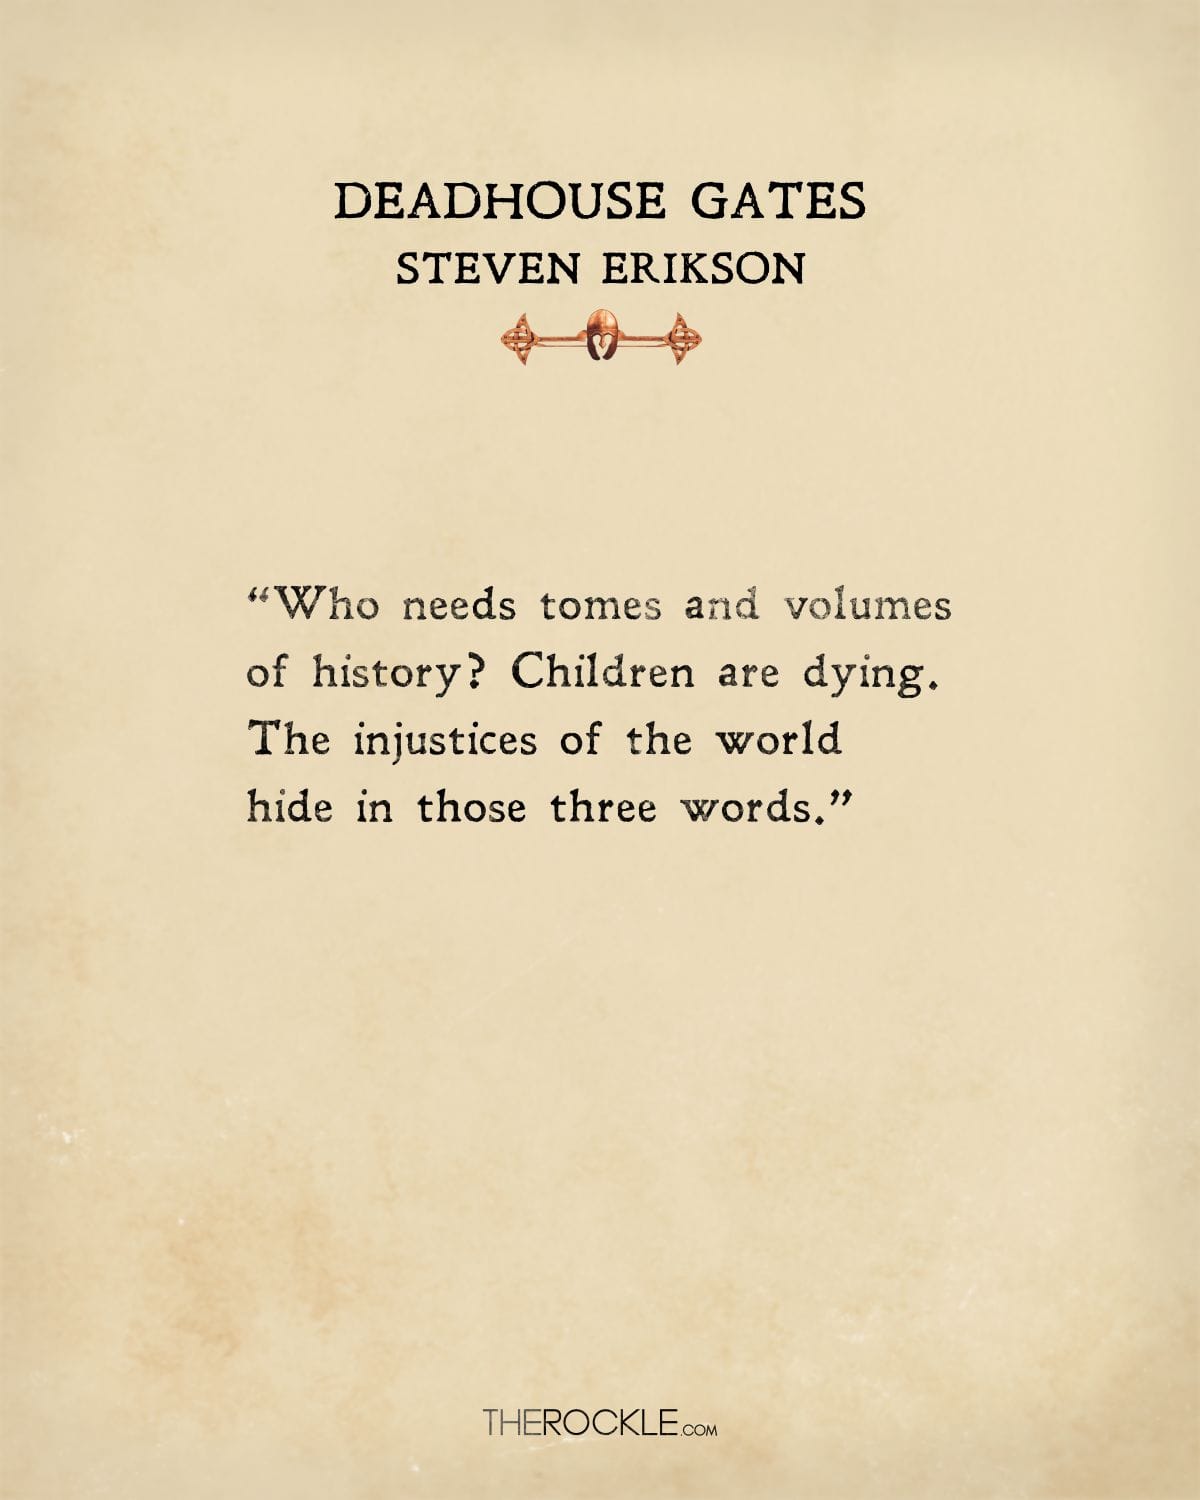 Steven Erikson quote from Deadhouse Gates